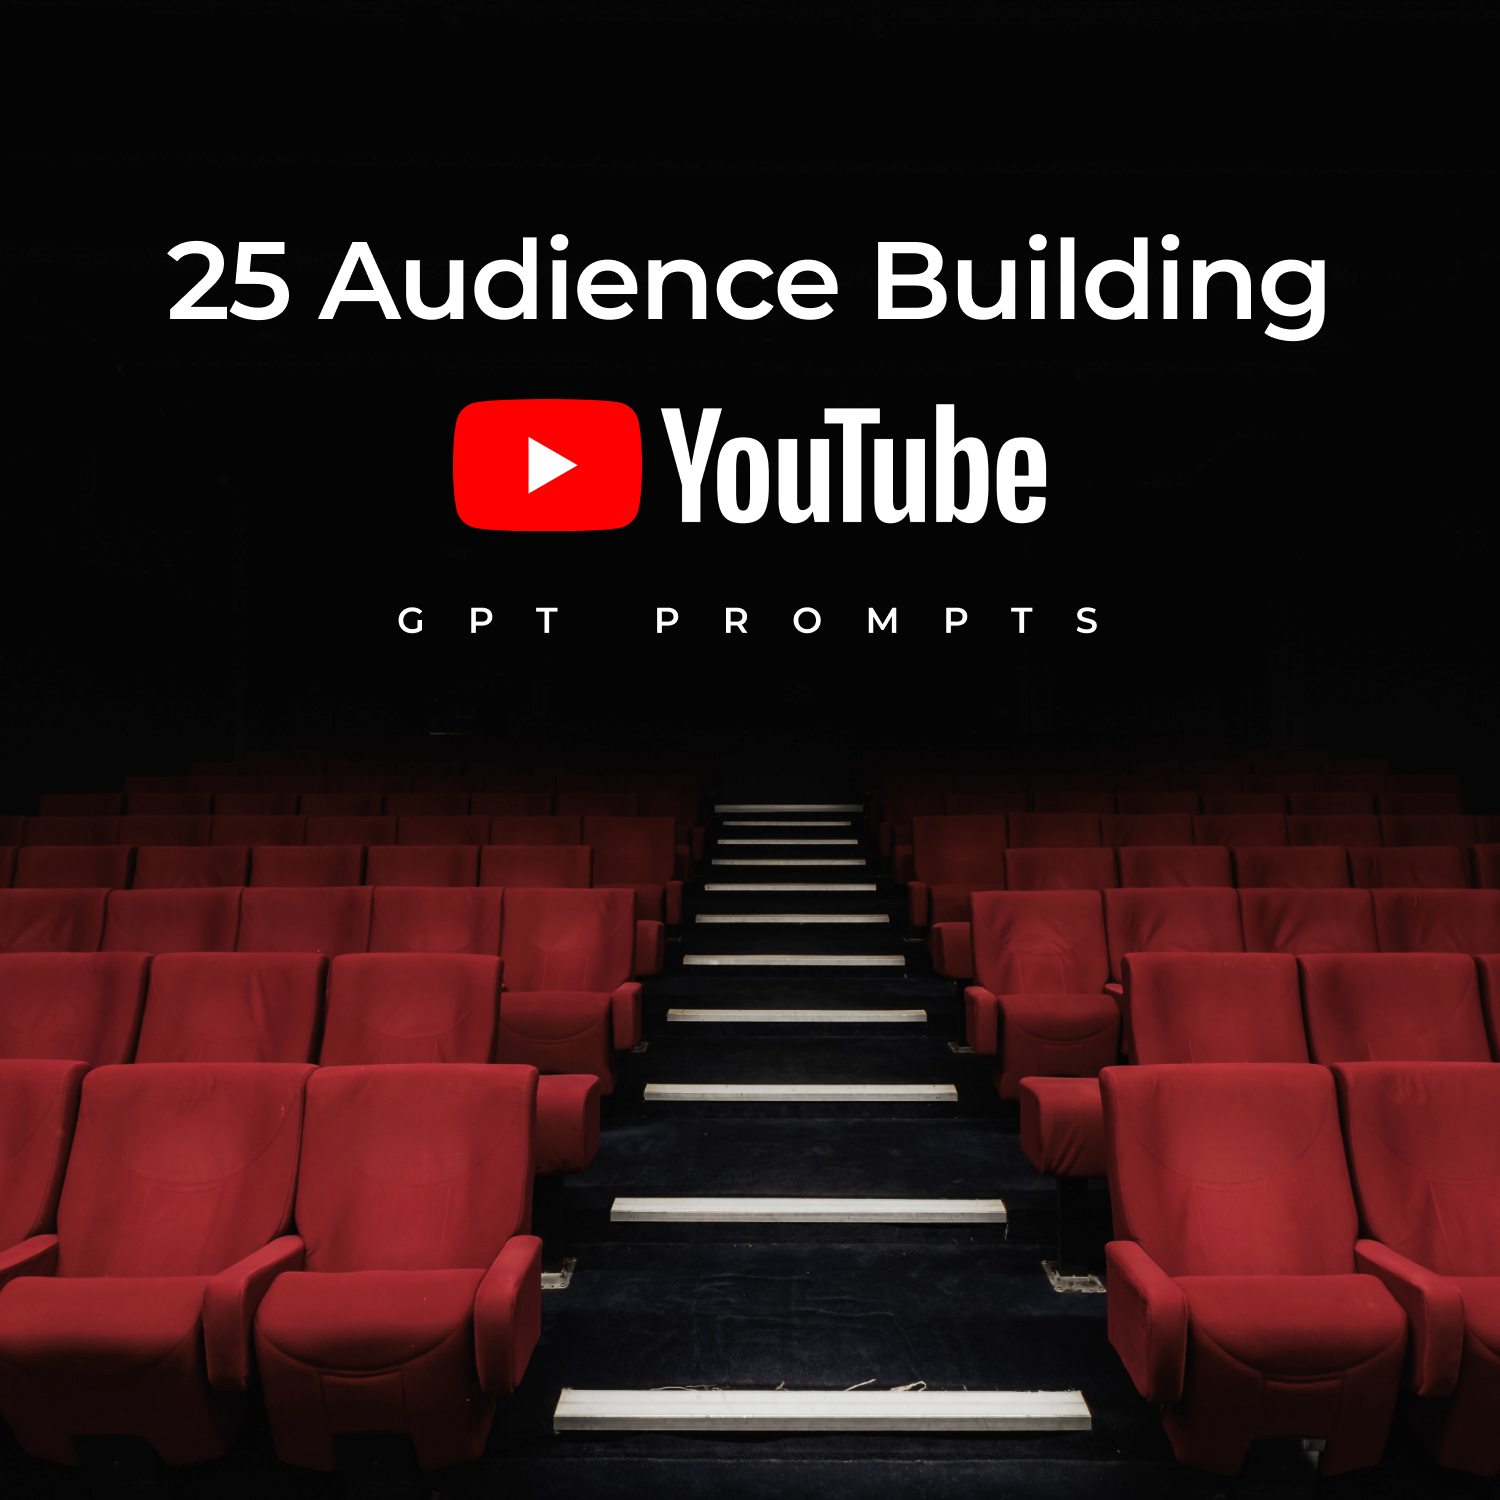 25 audience building youtube 1000 1500 1 268